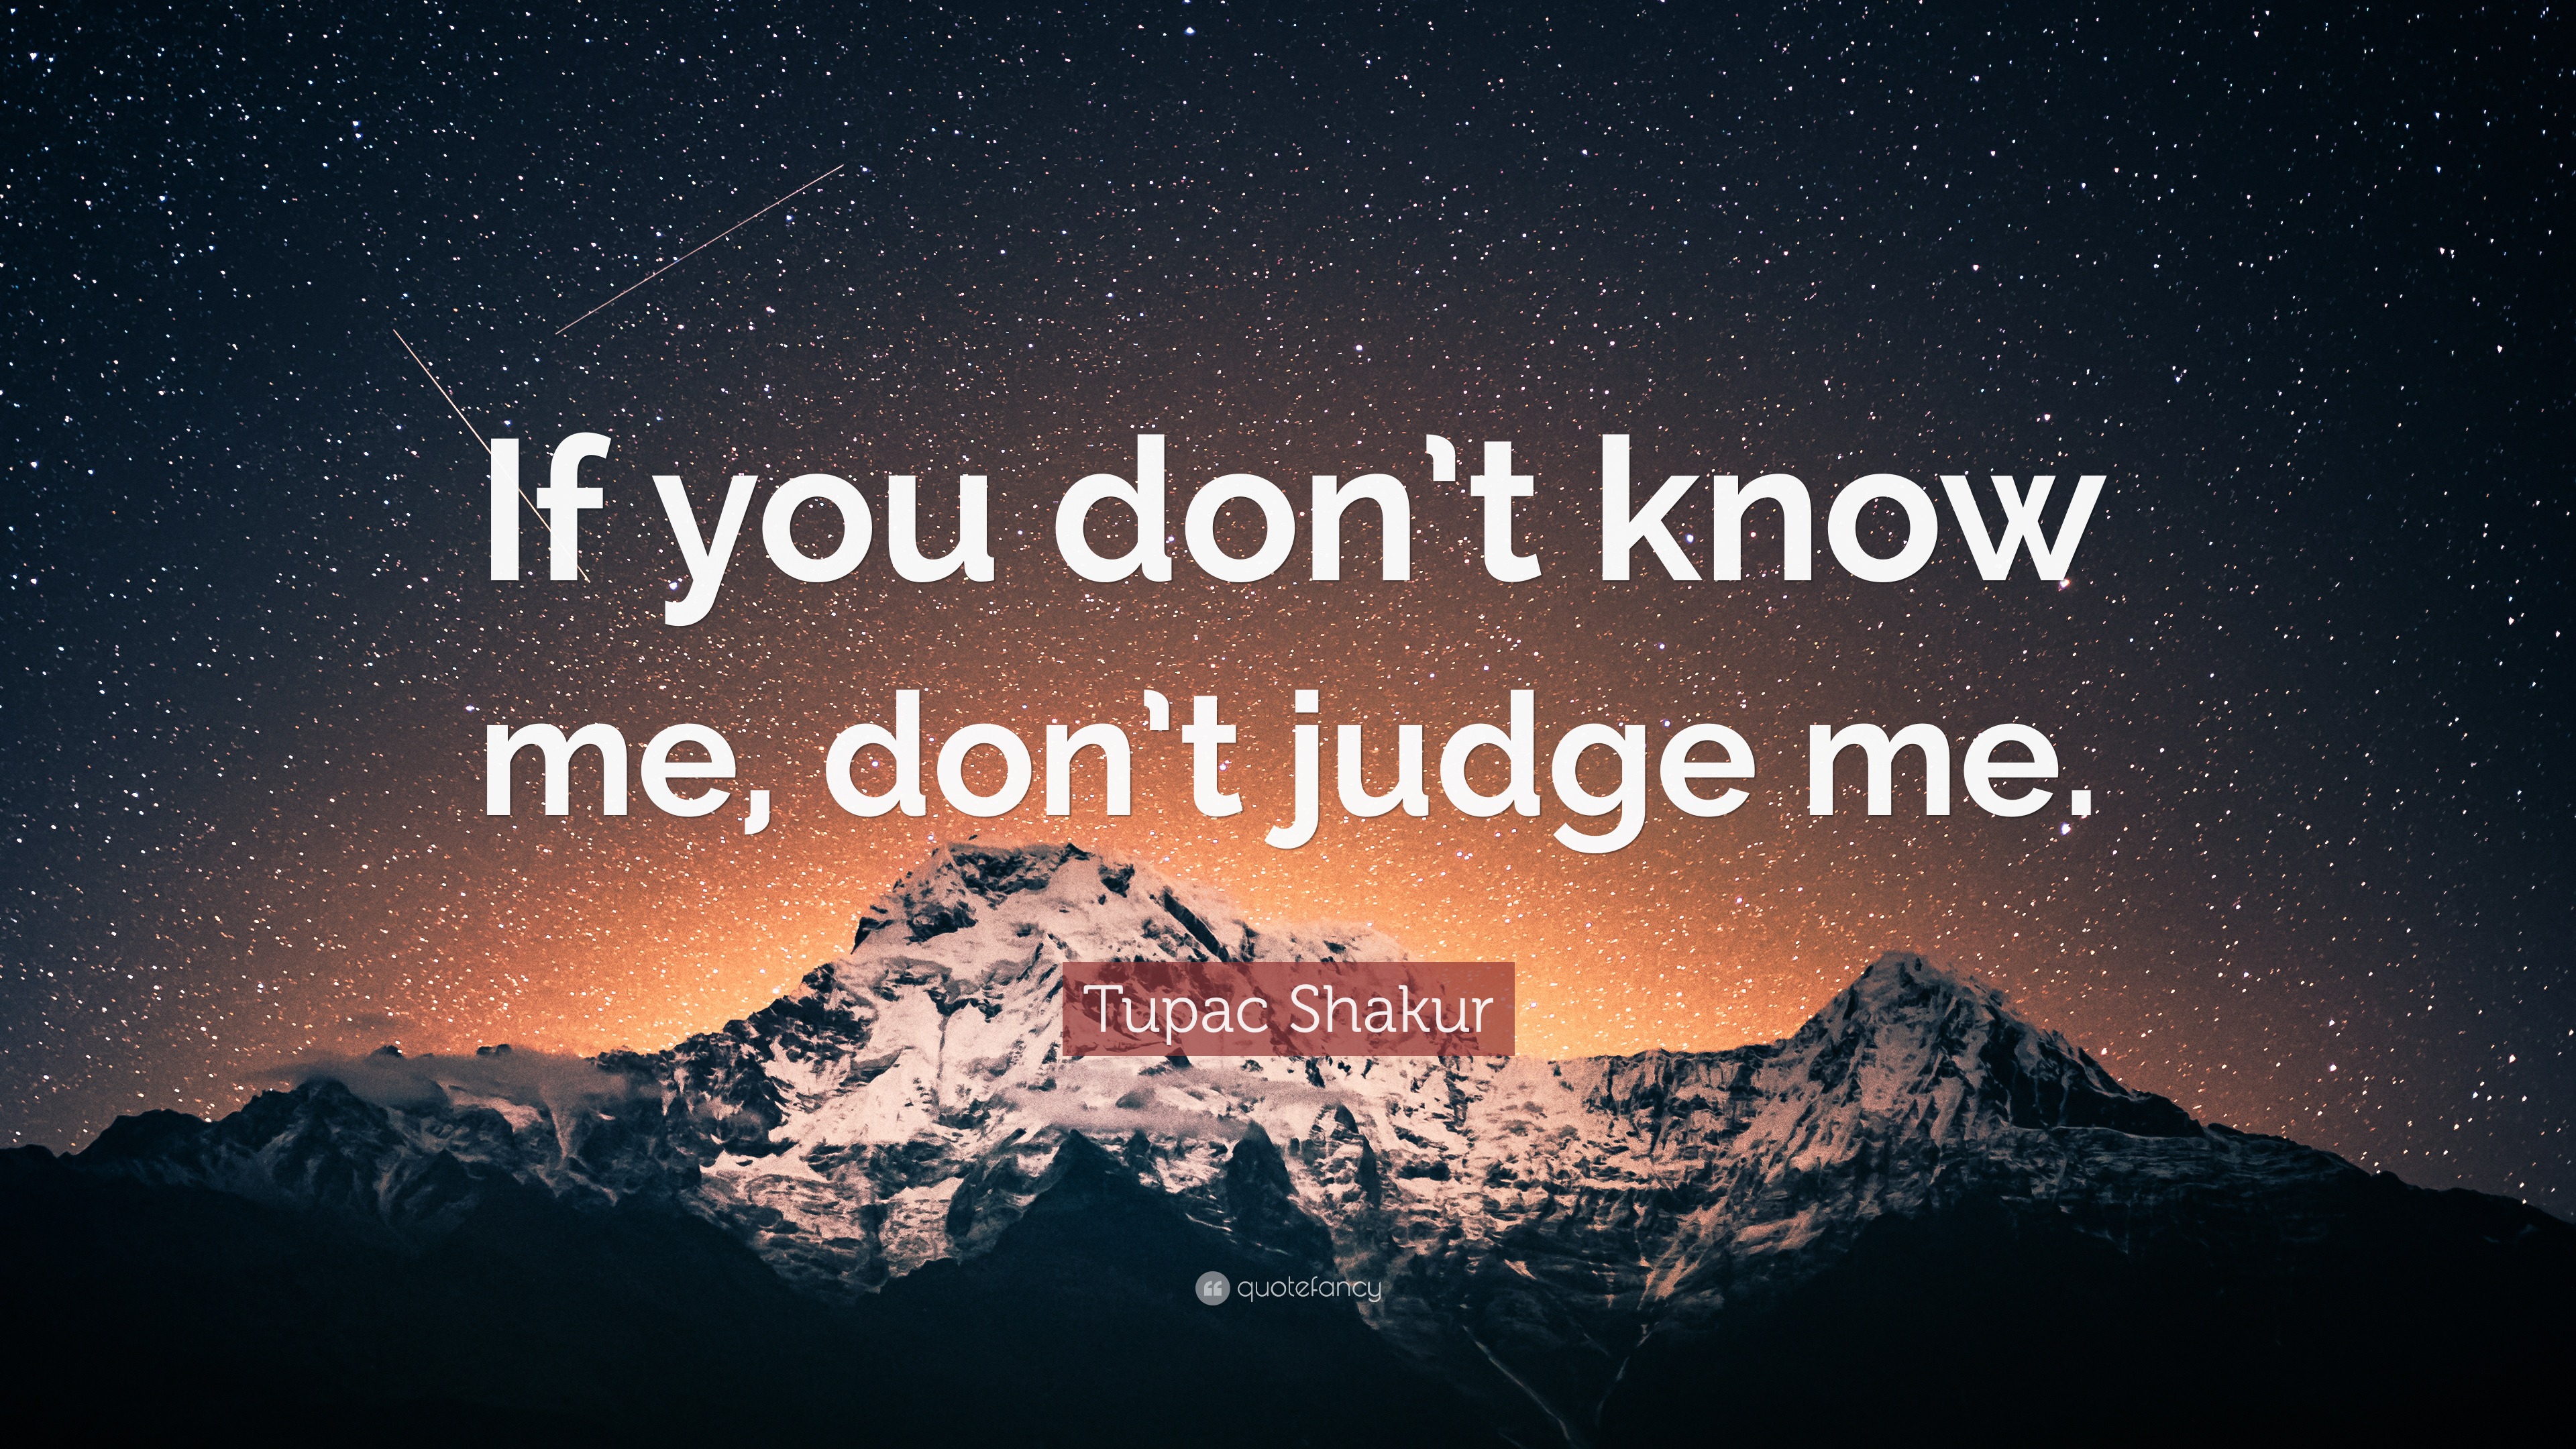 Tupac Shakur Quote: "If you don't know me, don't judge me." (12 wallpapers) - Quotefancy